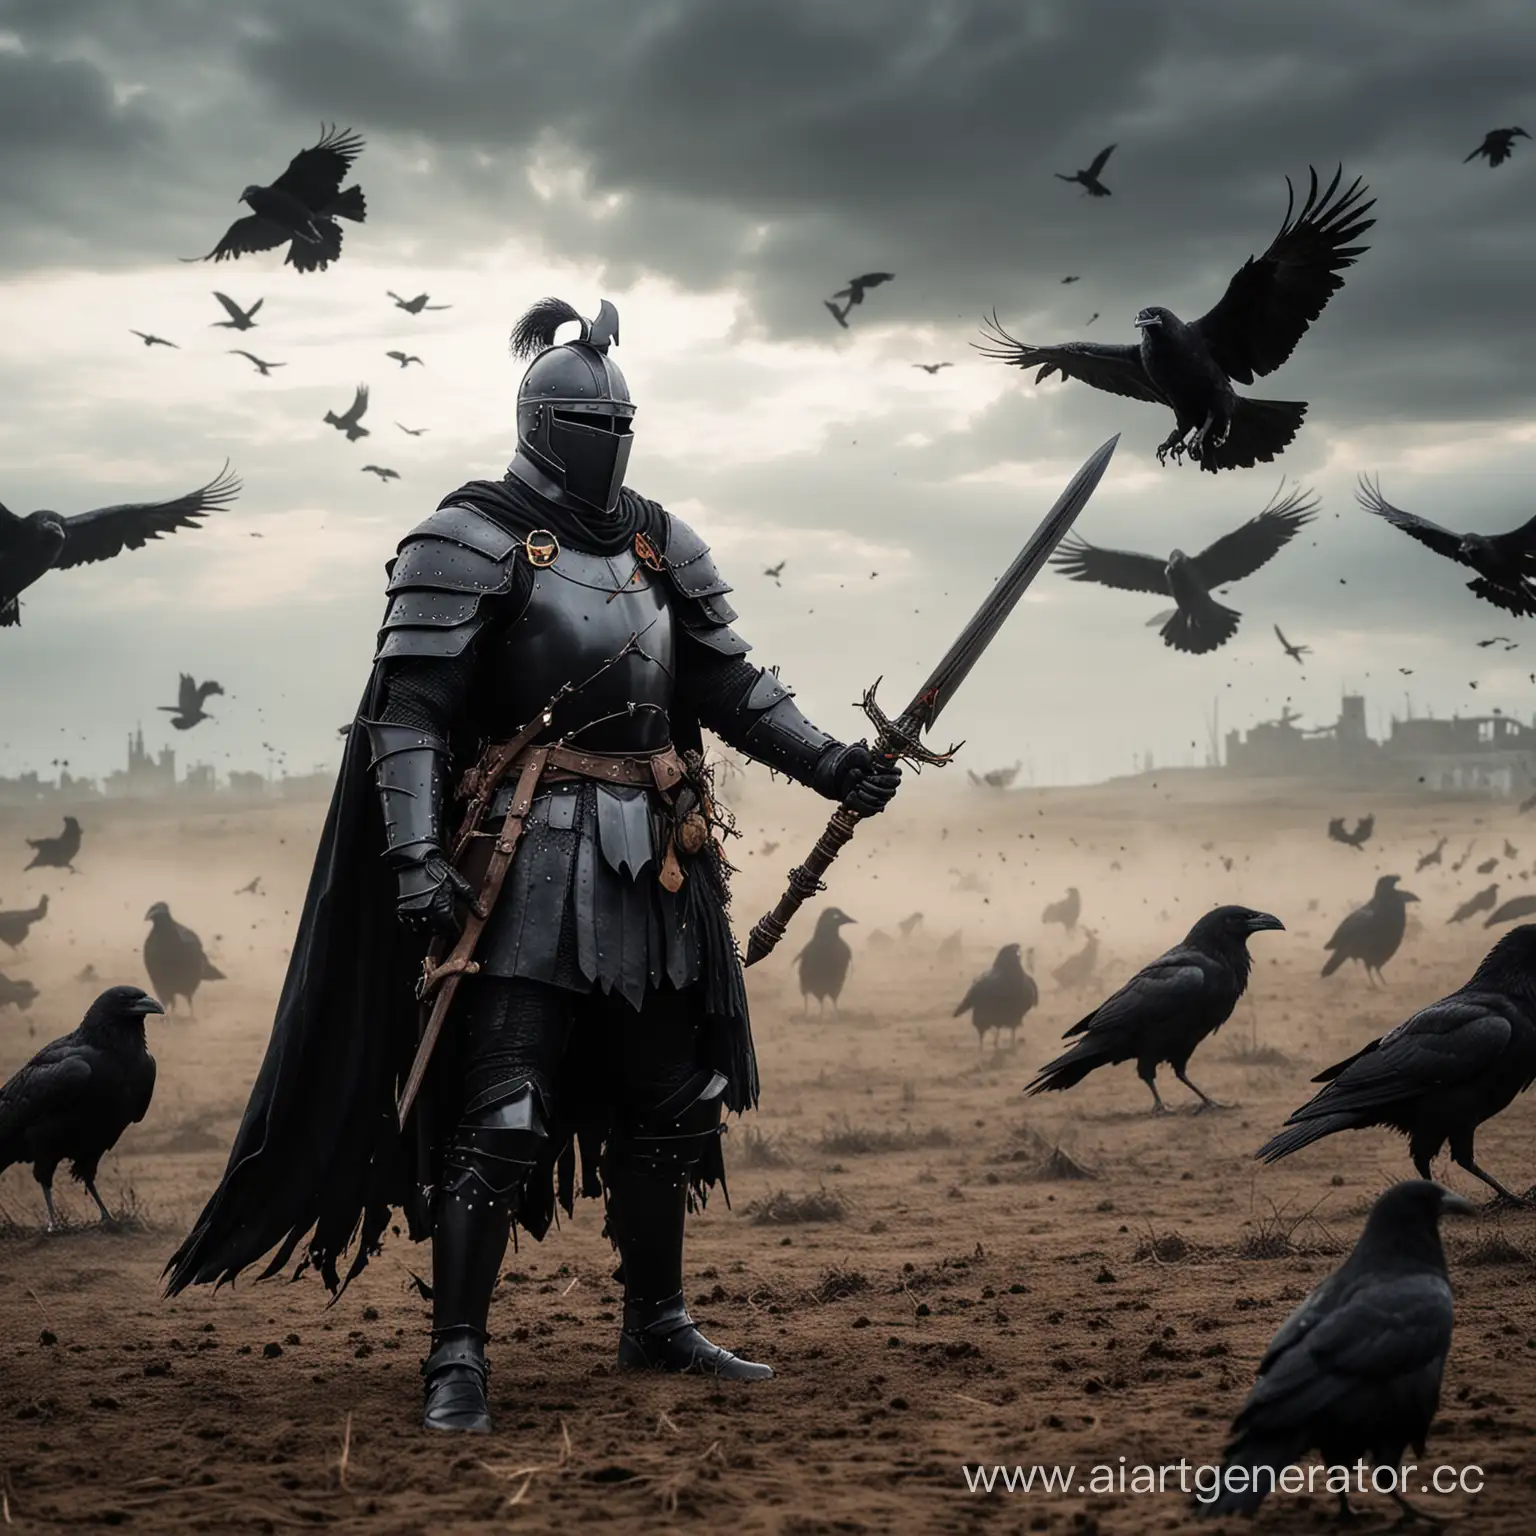 Epic-Black-Knight-Confronting-Crows-with-Sword-in-Field